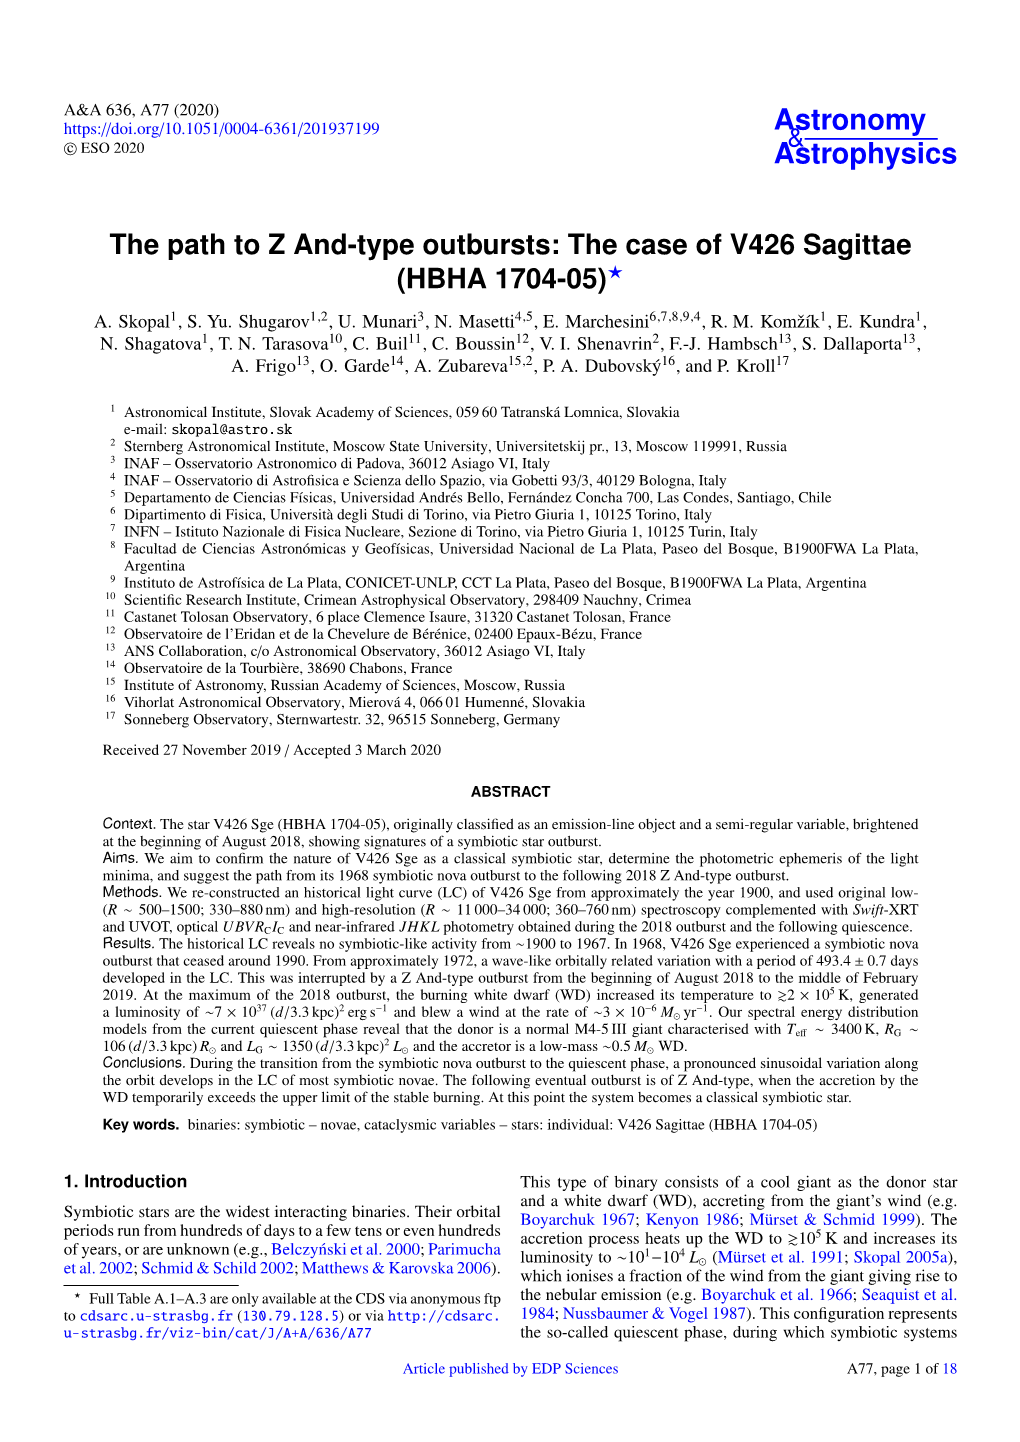 The Path to Z And-Type Outbursts: the Case of V426 Sagittae (HBHA 1704-05)? A